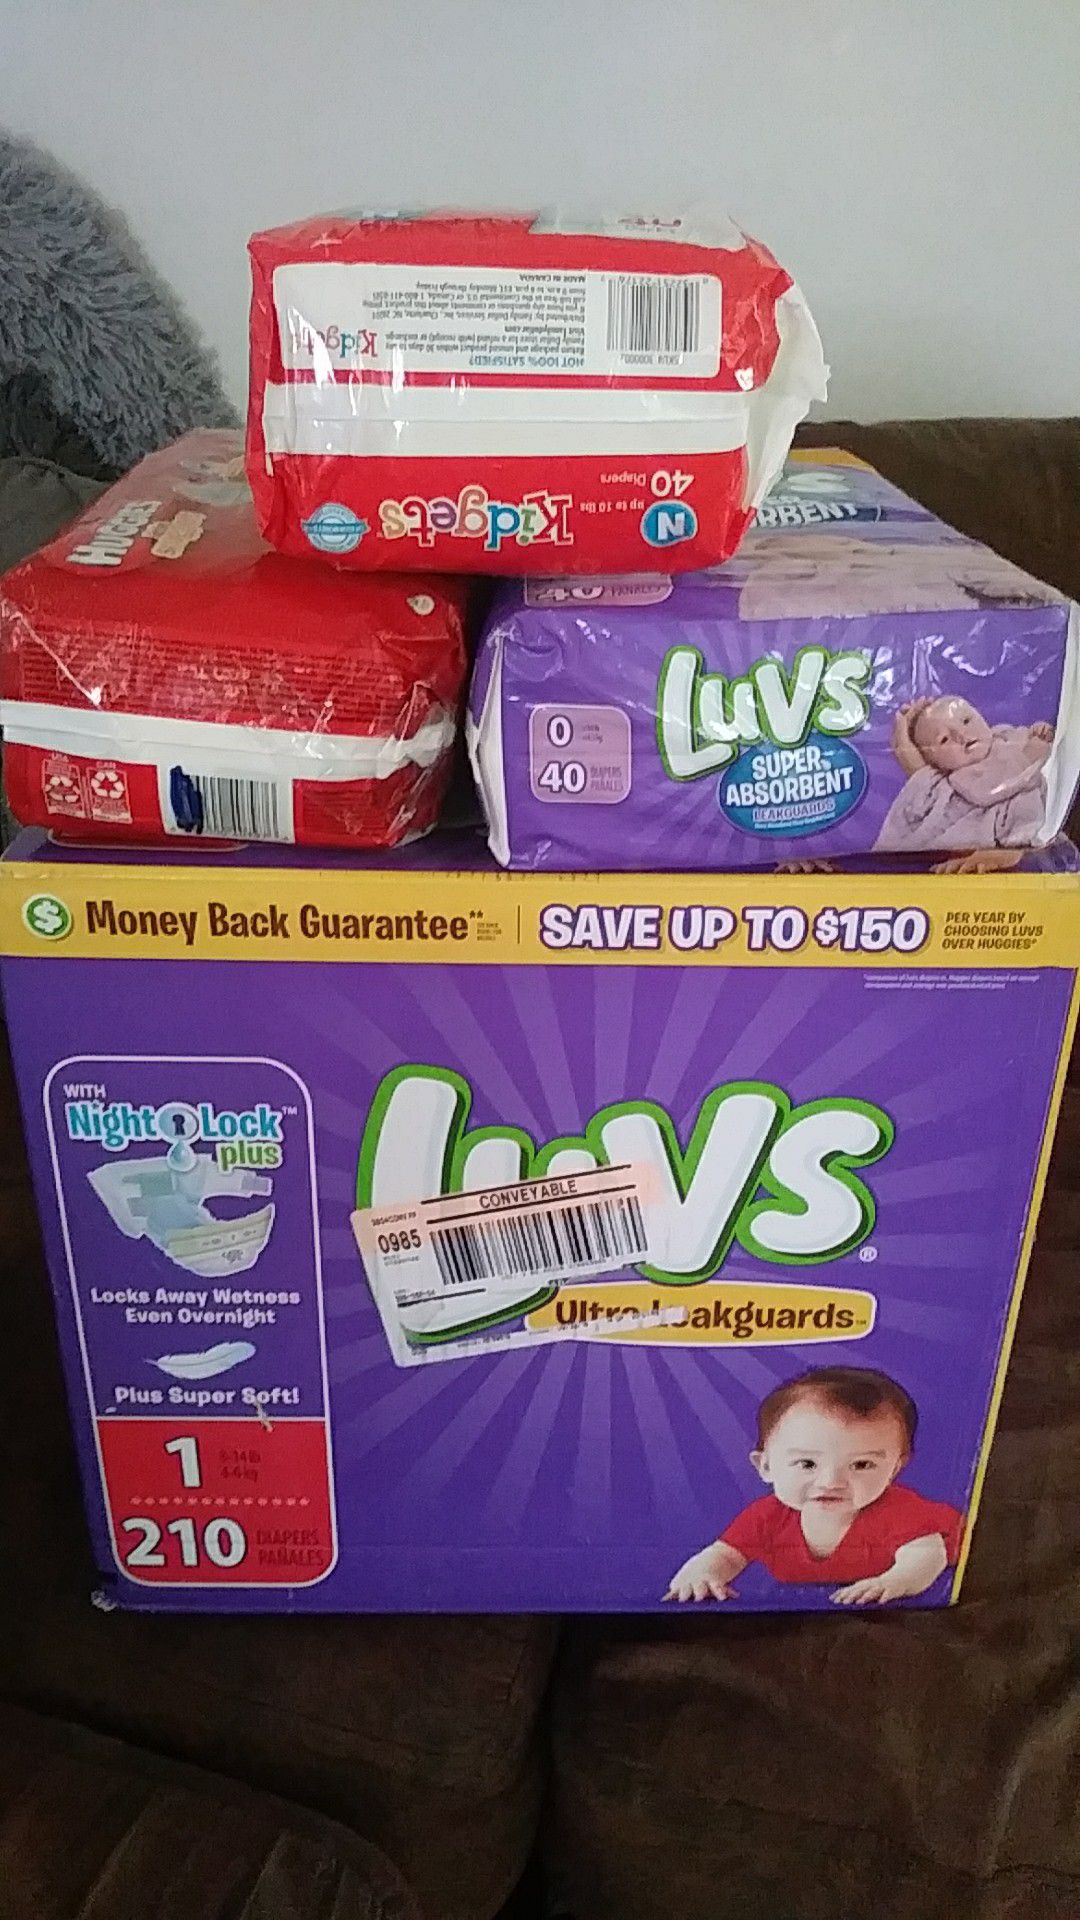 1s and newborns 20 for 4 packs of newborns and a 32 pack of 1s